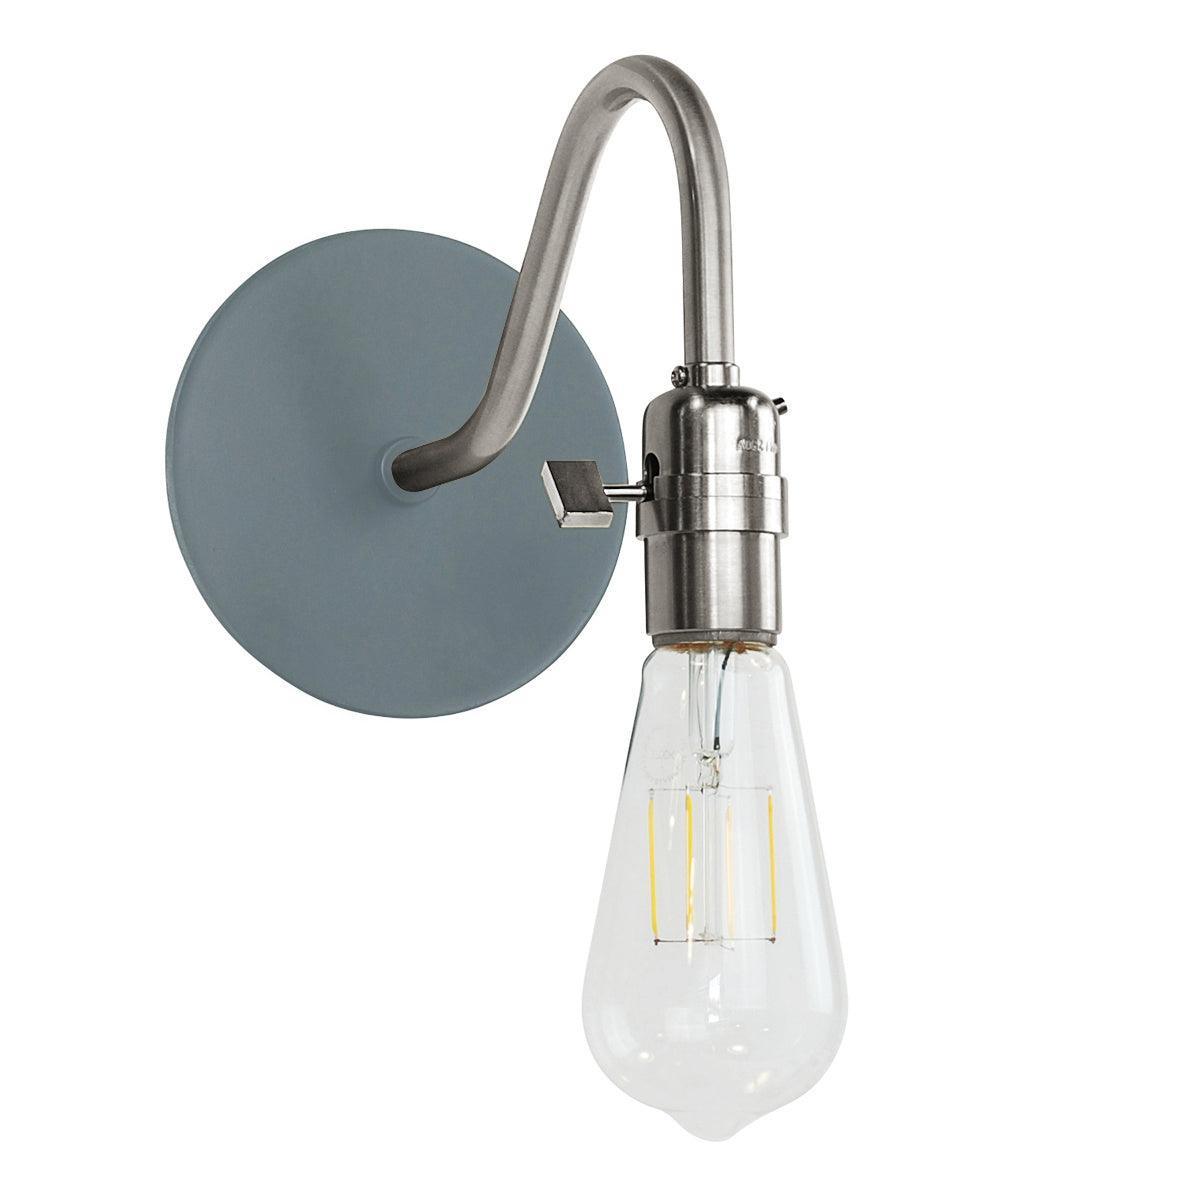 Montclair Light Works - Uno SCL400 Wall Sconce - SCL400-40-96 | Montreal Lighting & Hardware